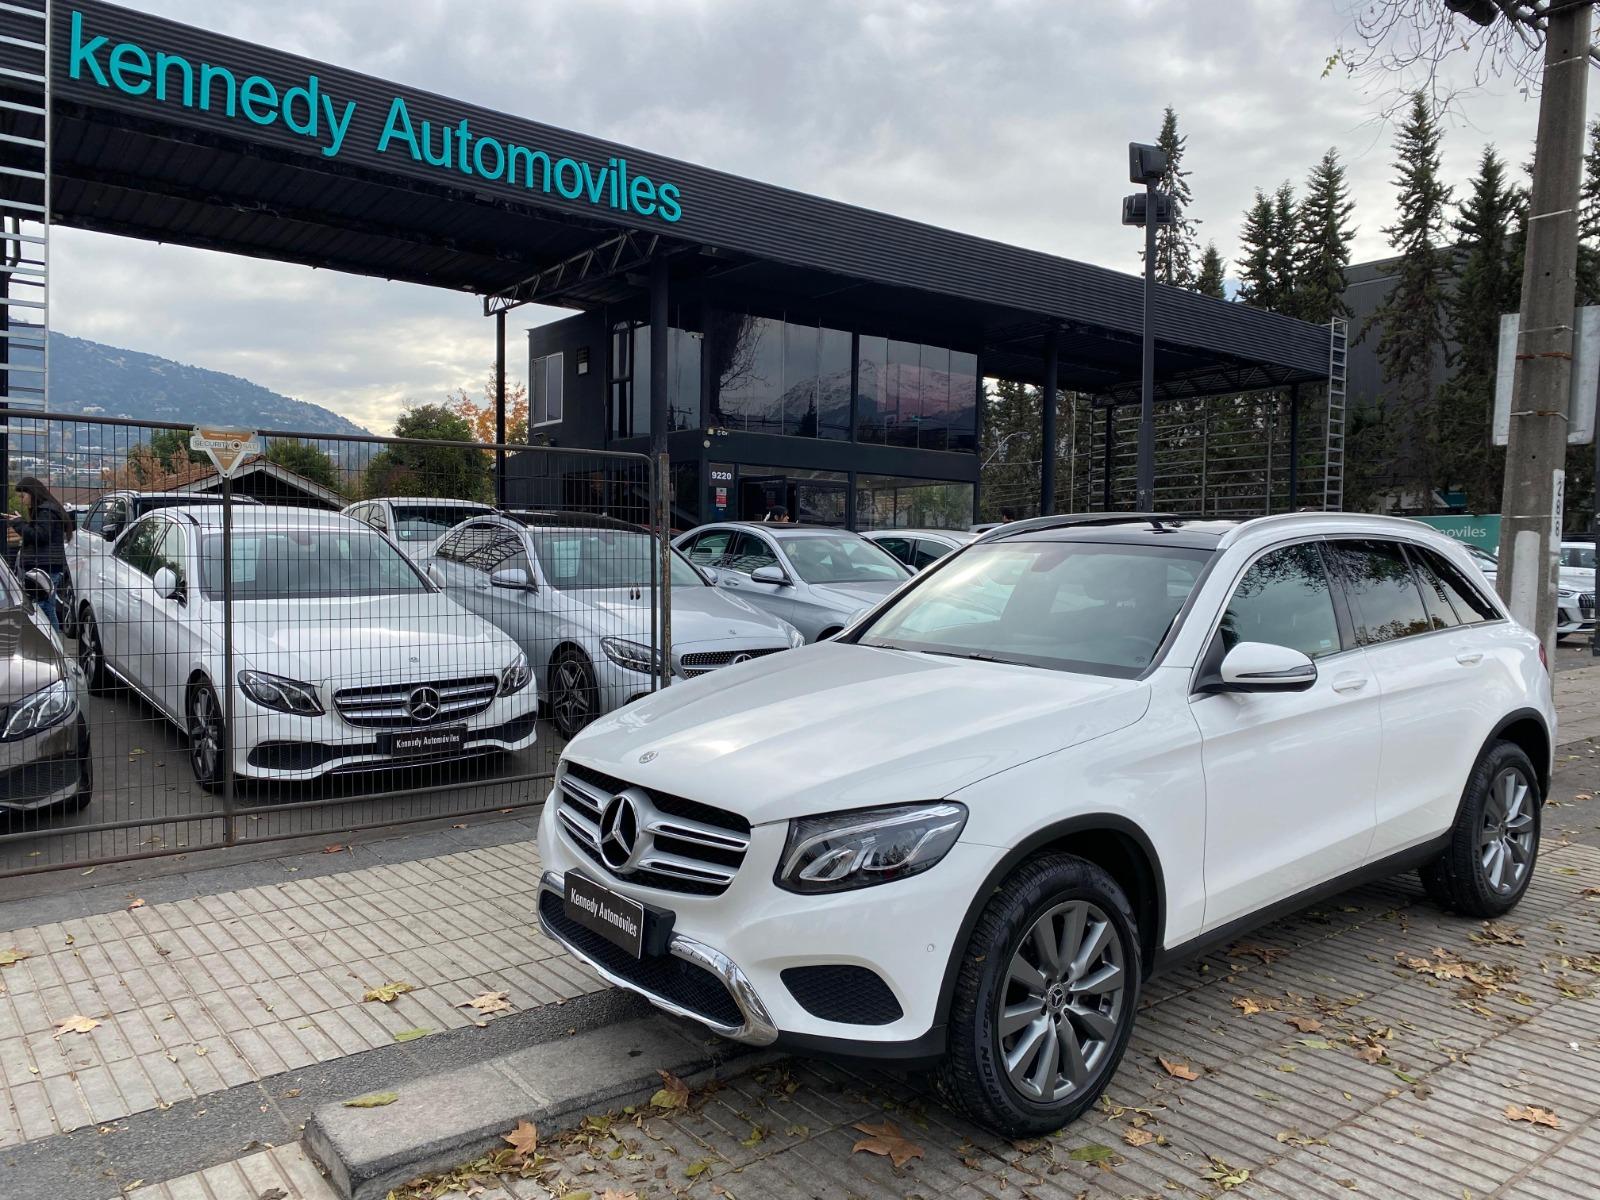 MERCEDES-BENZ GLC 300 Glc300 4Matic Auto 2019 Impecable - KENNEDY AUTOMOVILES